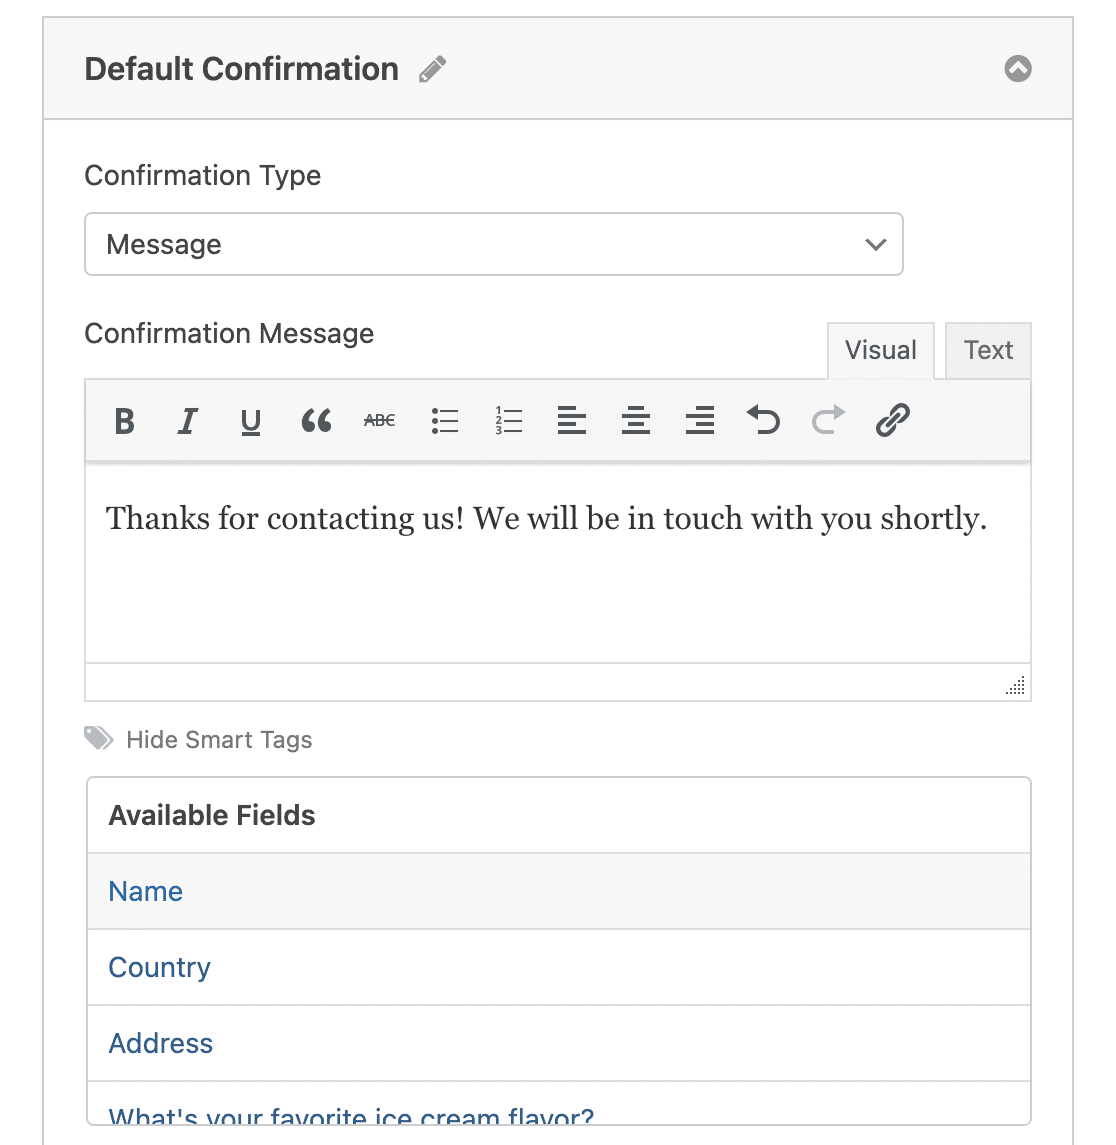 Adding a Smart Tag to a confirmation to show the user's name